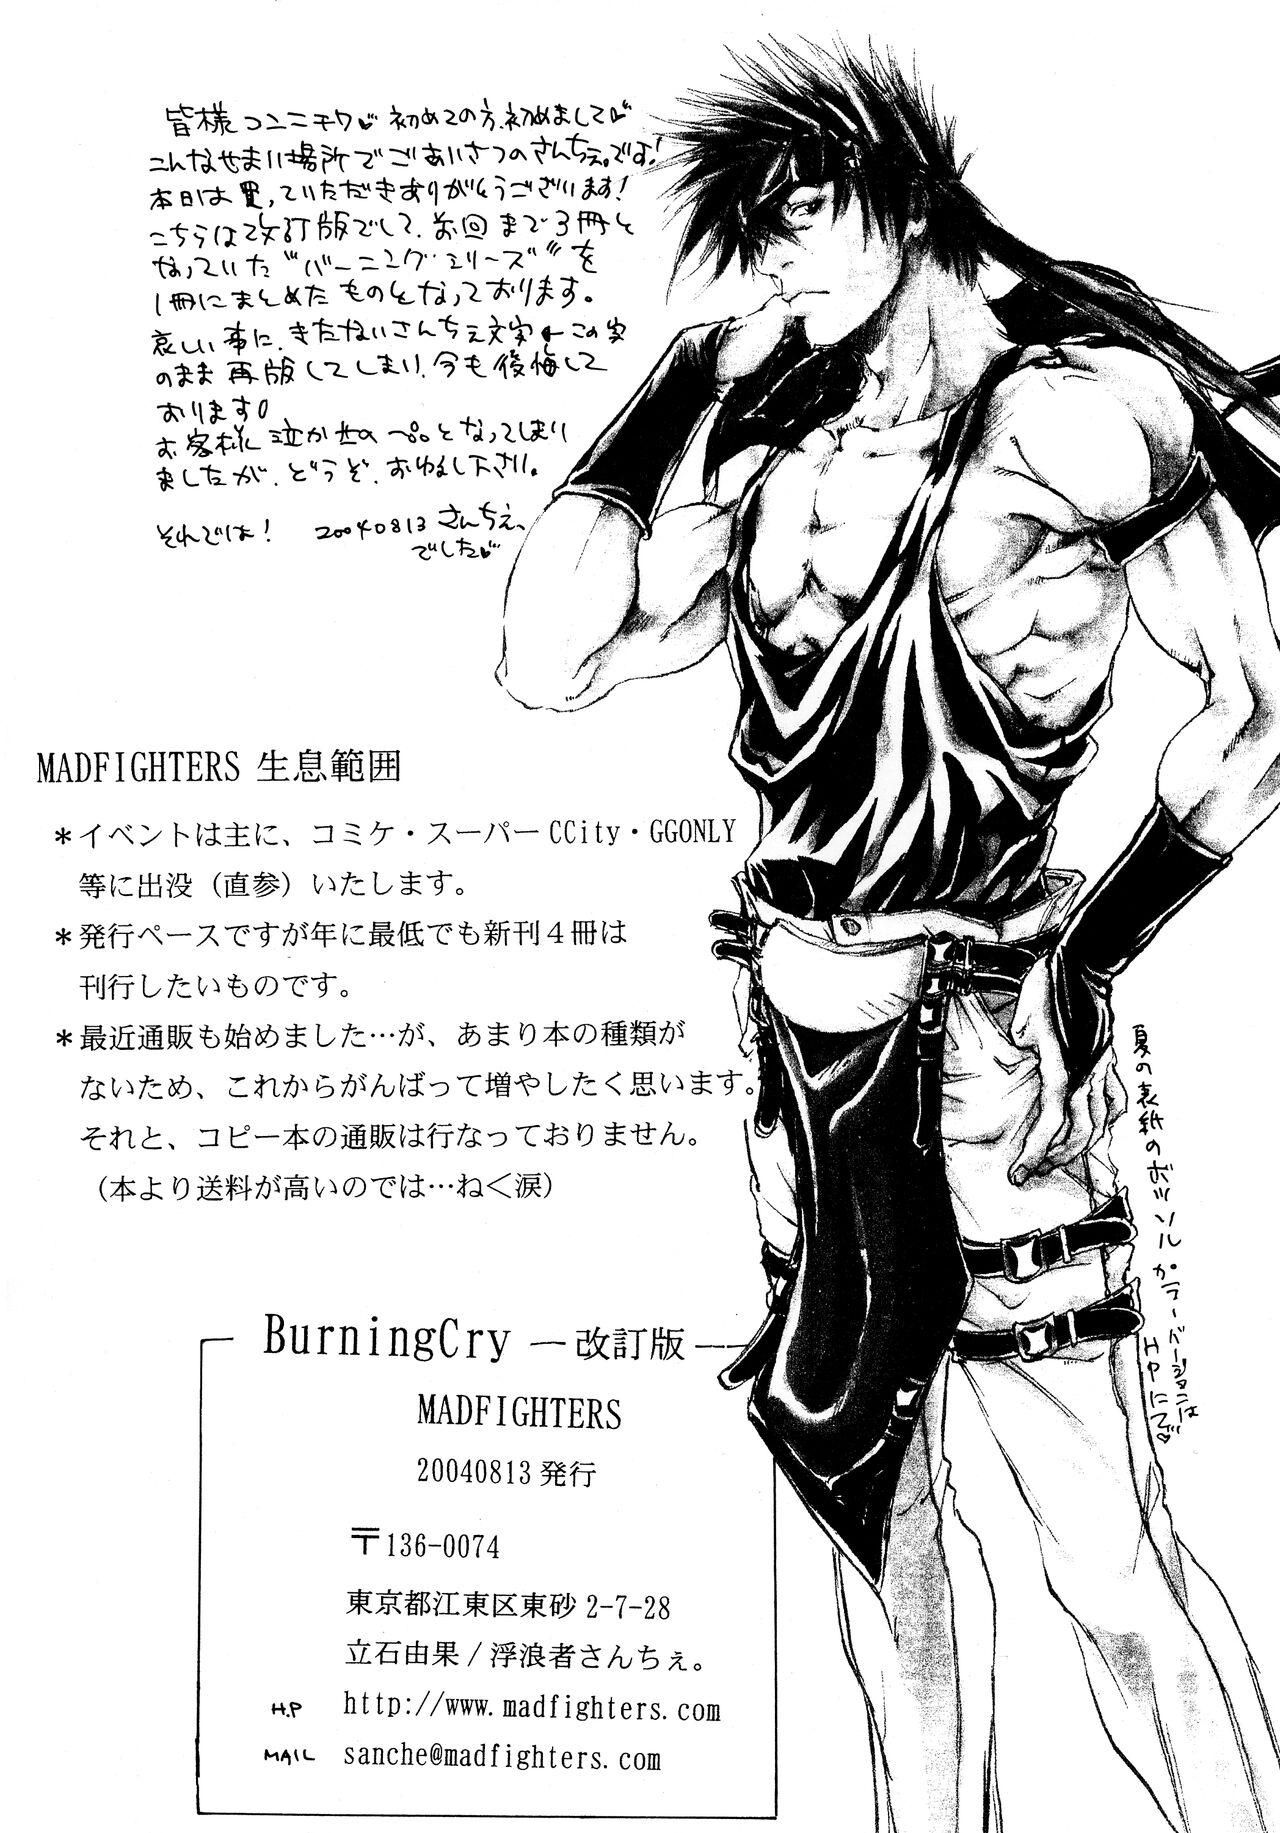 Jerking Off BurningCry Kaiteiban - Guilty gear Latinos - Page 4